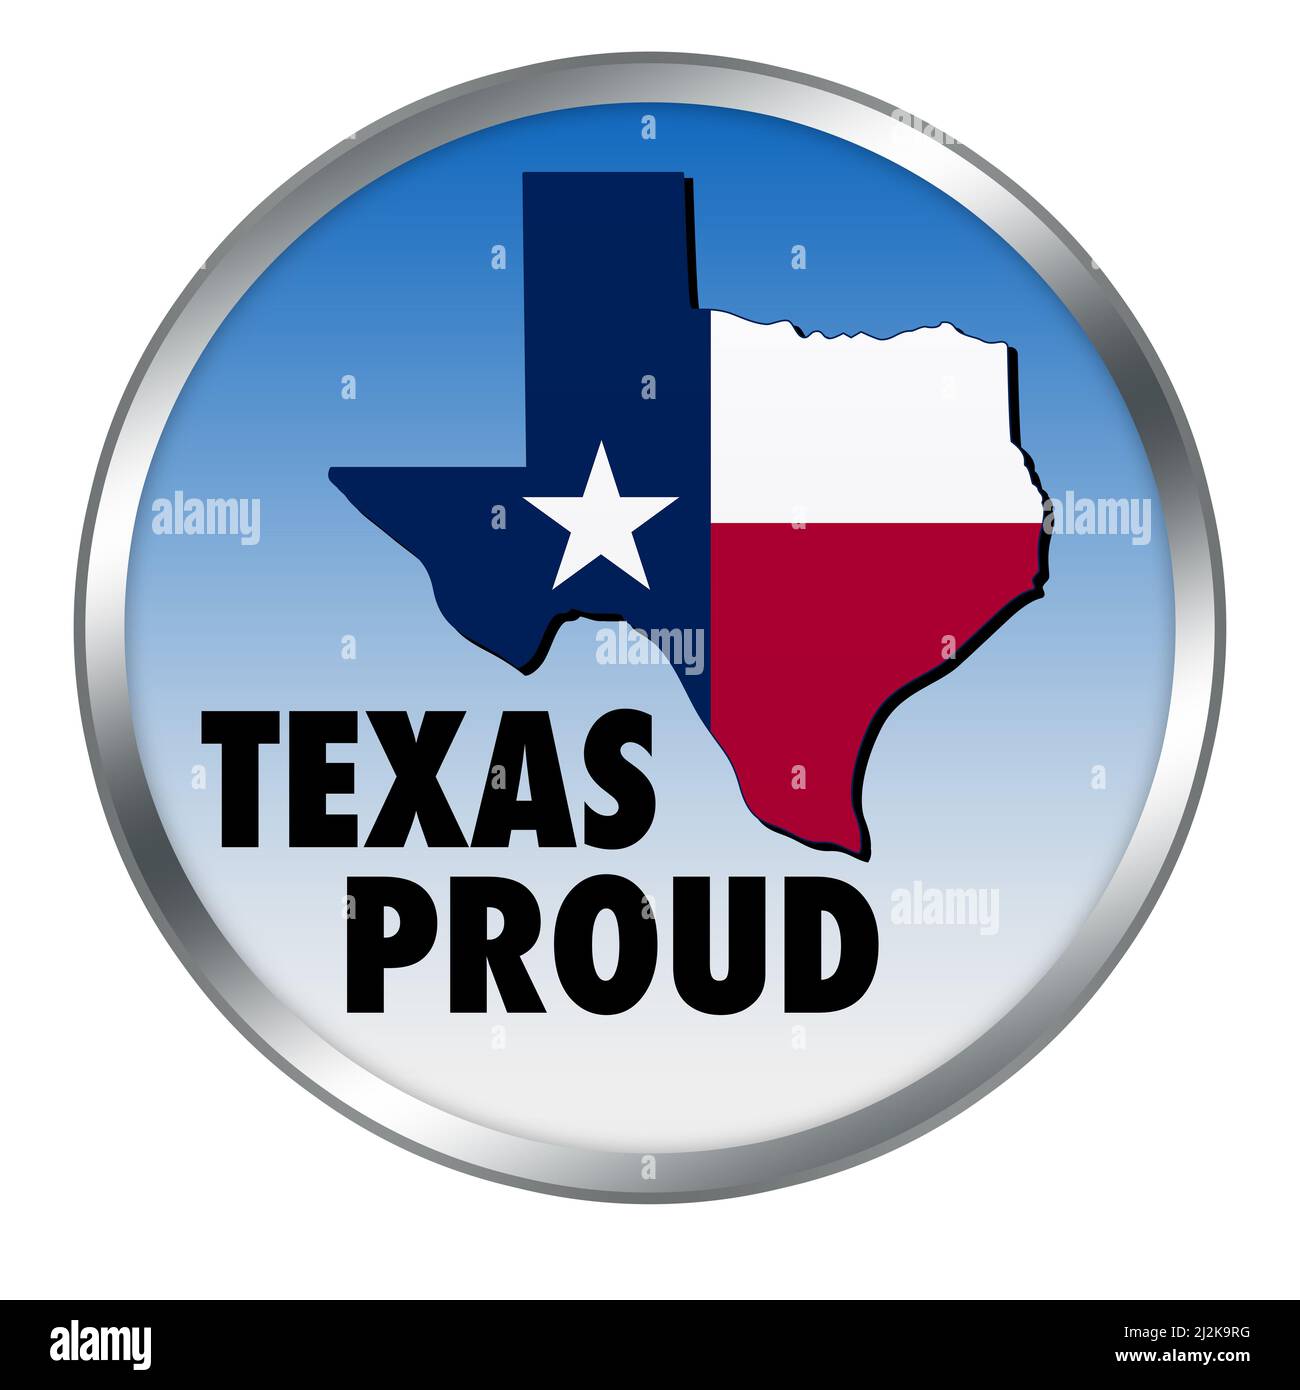 Texas Proud with state map shape and flag in a round button illustration Stock Photo